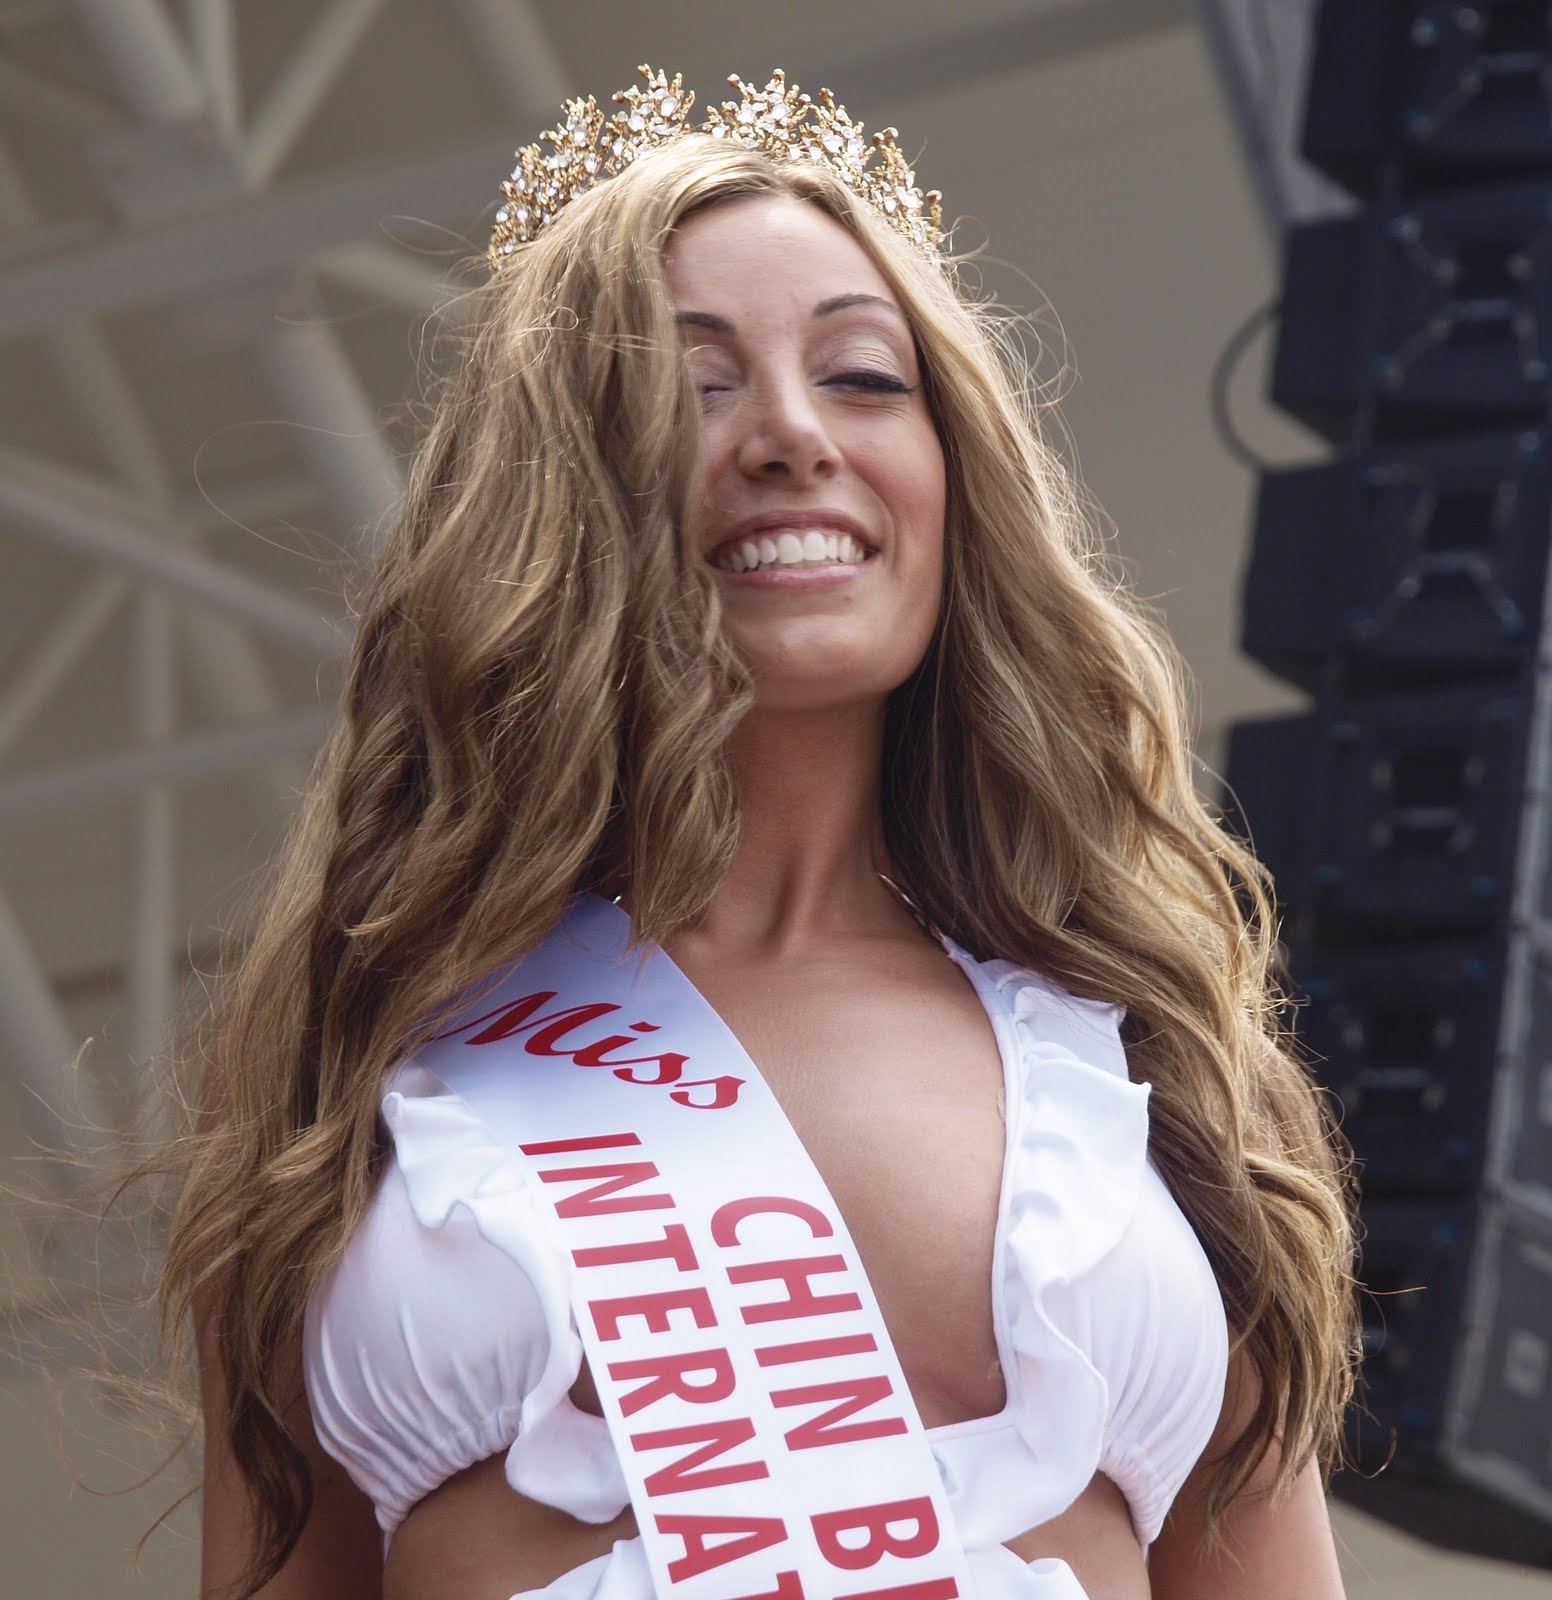 MISS CHIN INTERNATION CROWNED (and info about tomorrows male bikini contest and free David Rudder concert)